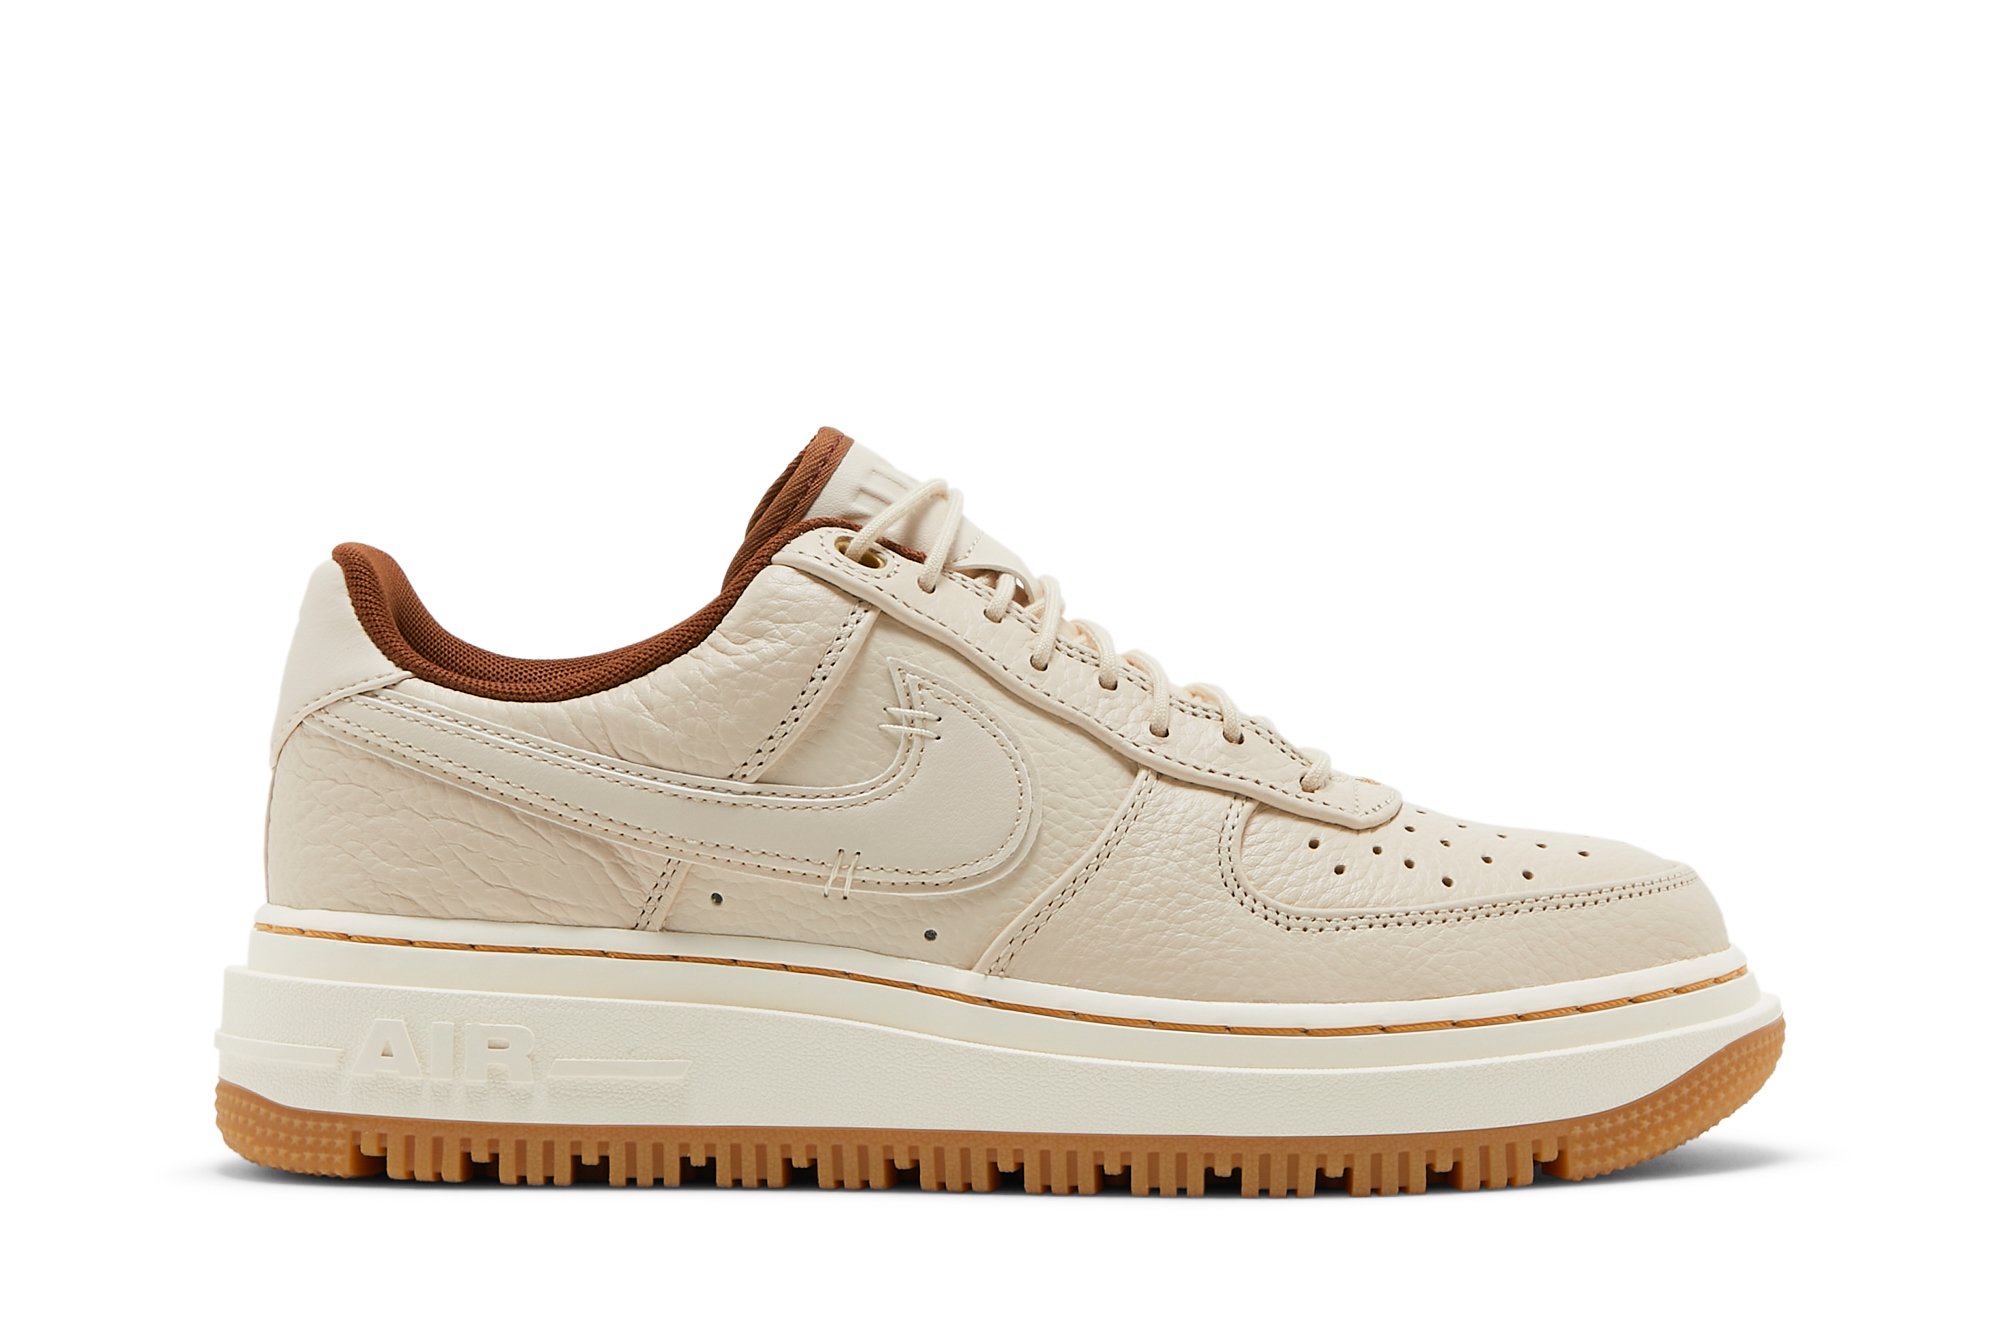 Buy Air Force 1 Luxe 'Pecan' - DB4109 200 | GOAT